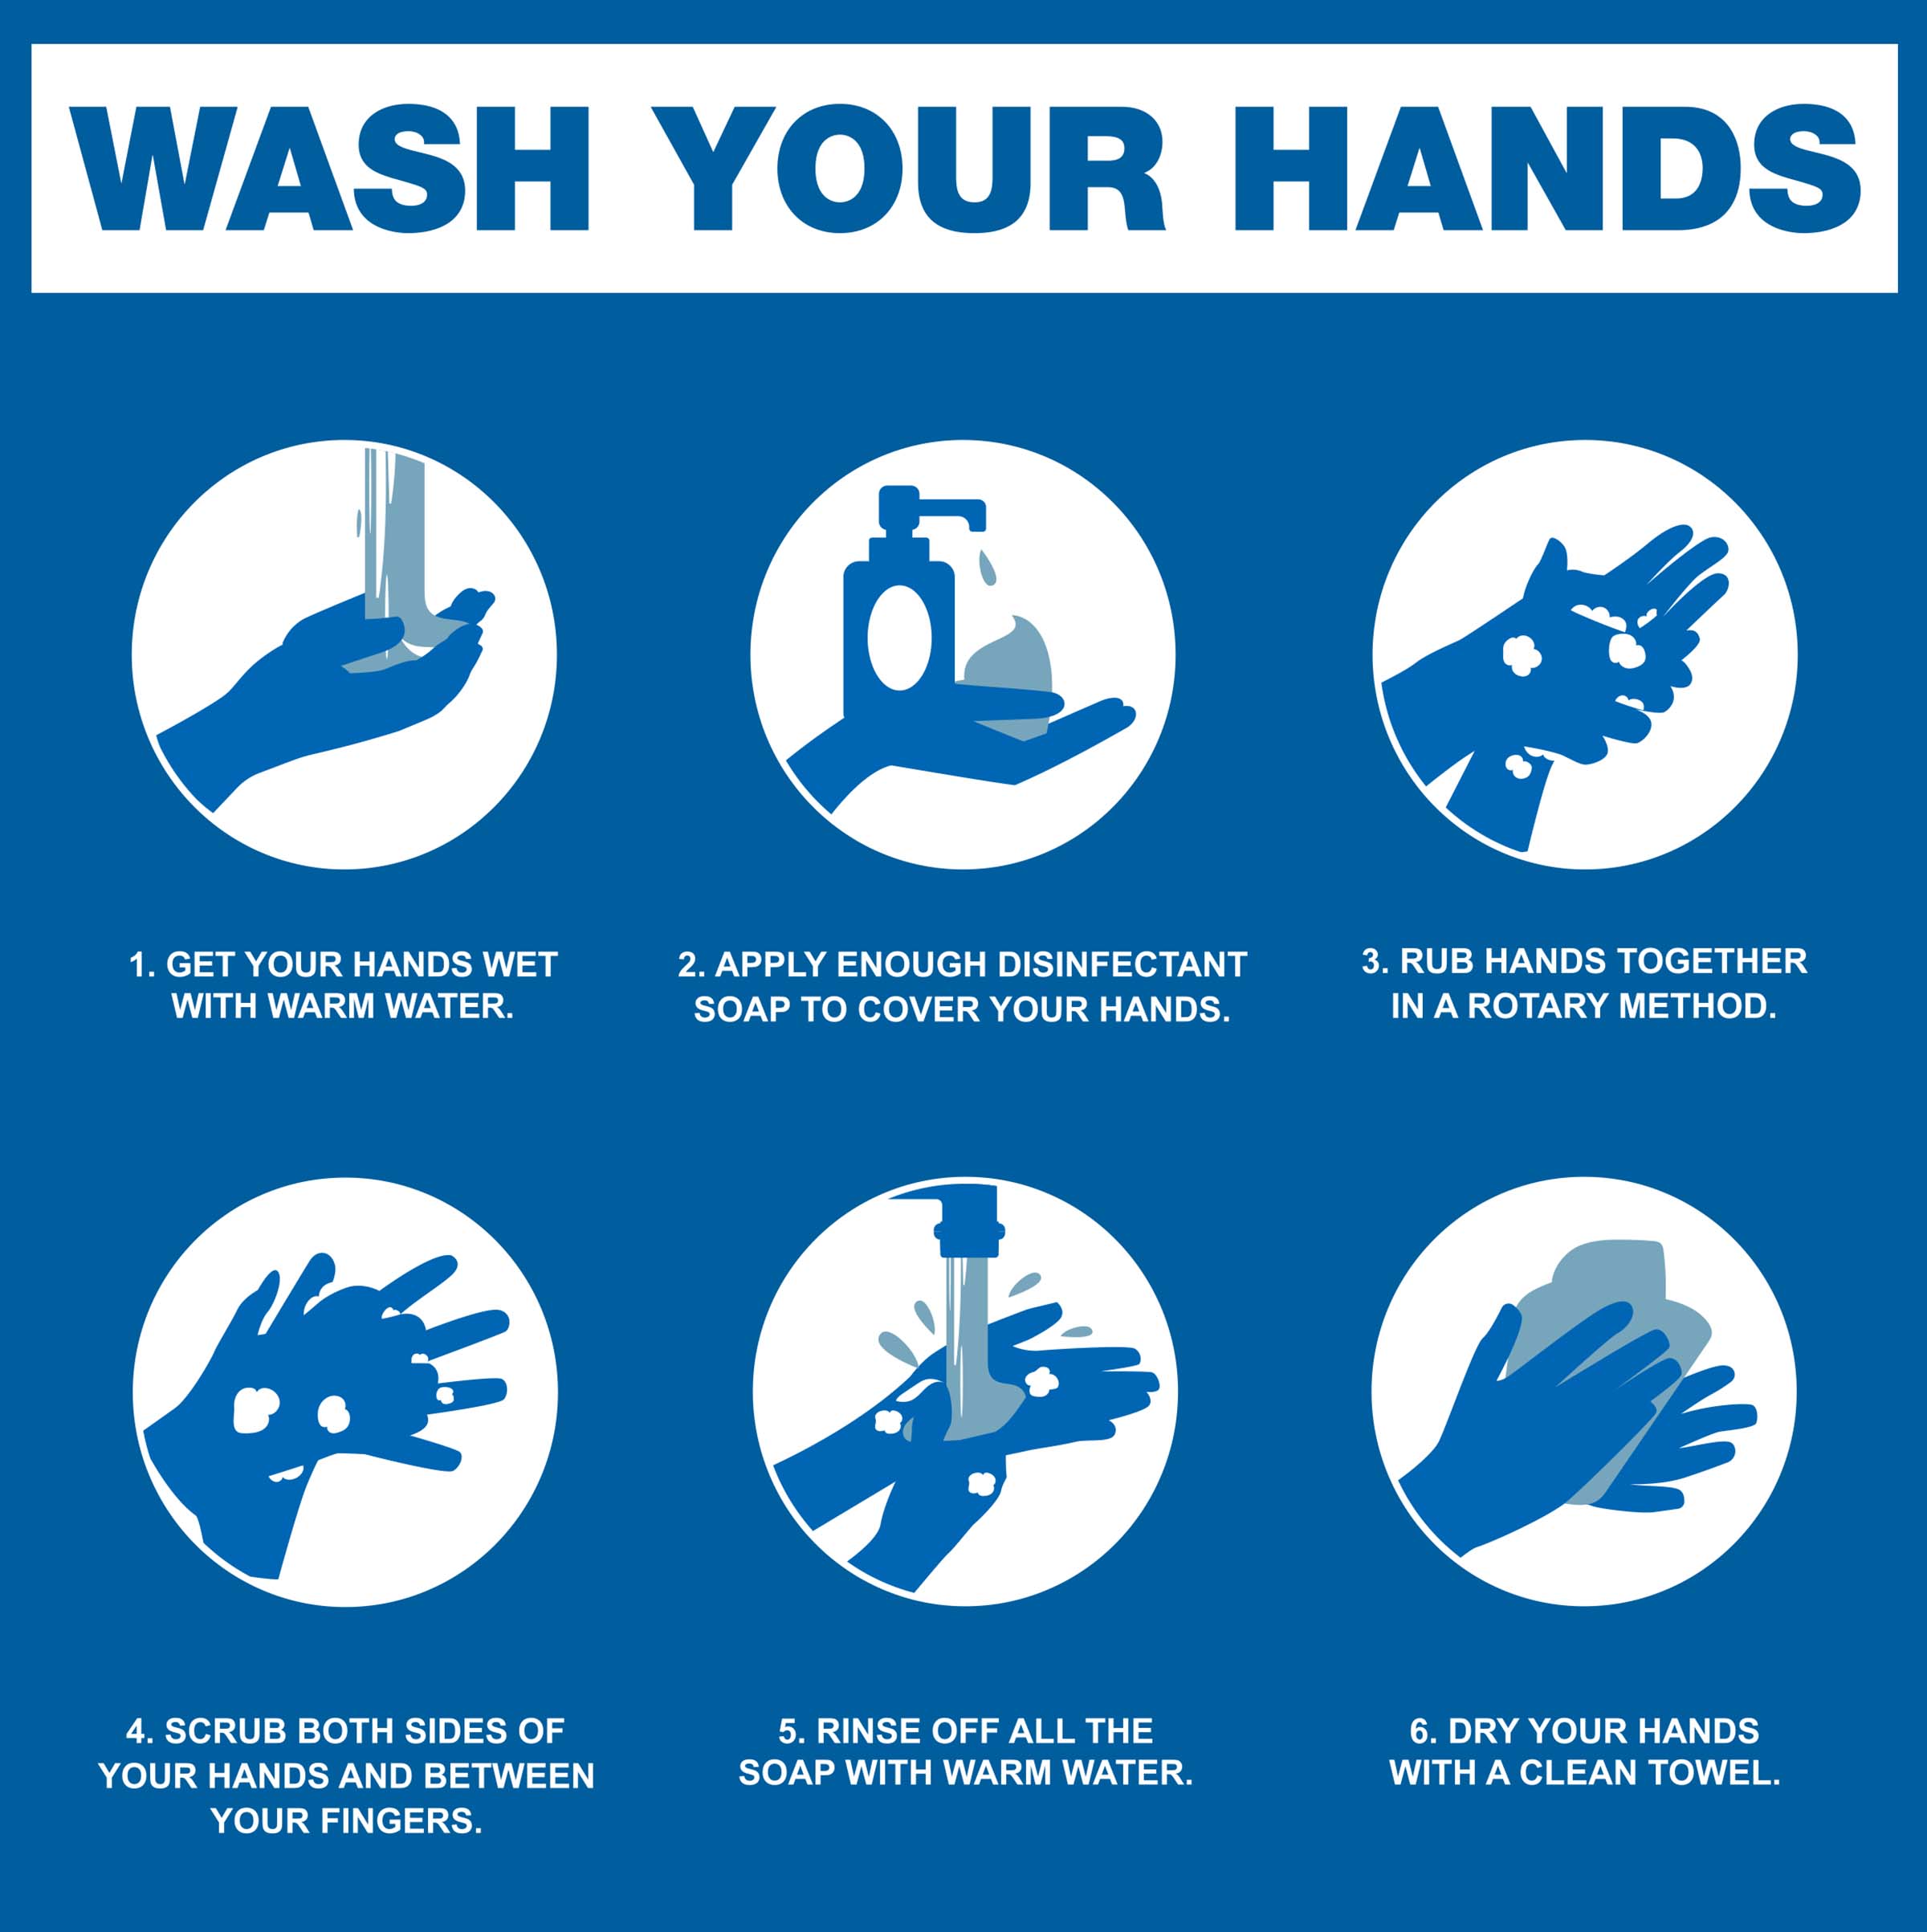 SOA - Wash Your Hands 8" x 8" Decal - 4 pack